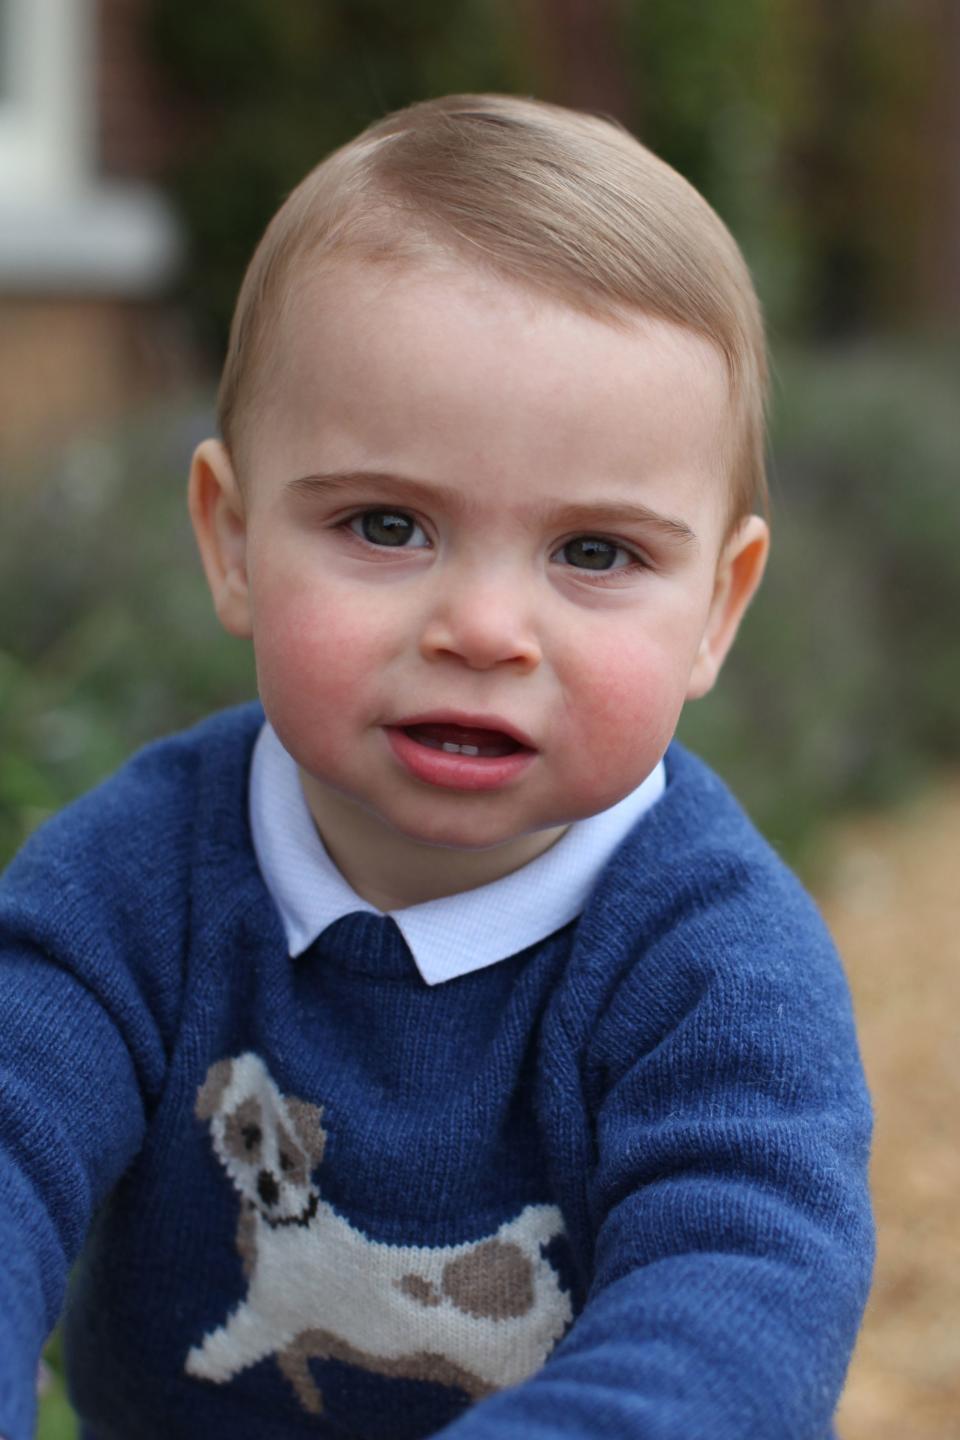 Prince Louis of Cambridge, in a picture taken by his mother, Duchess Kate of Cambridge, at their country home in Norfolk, to mark his 1st birthday.